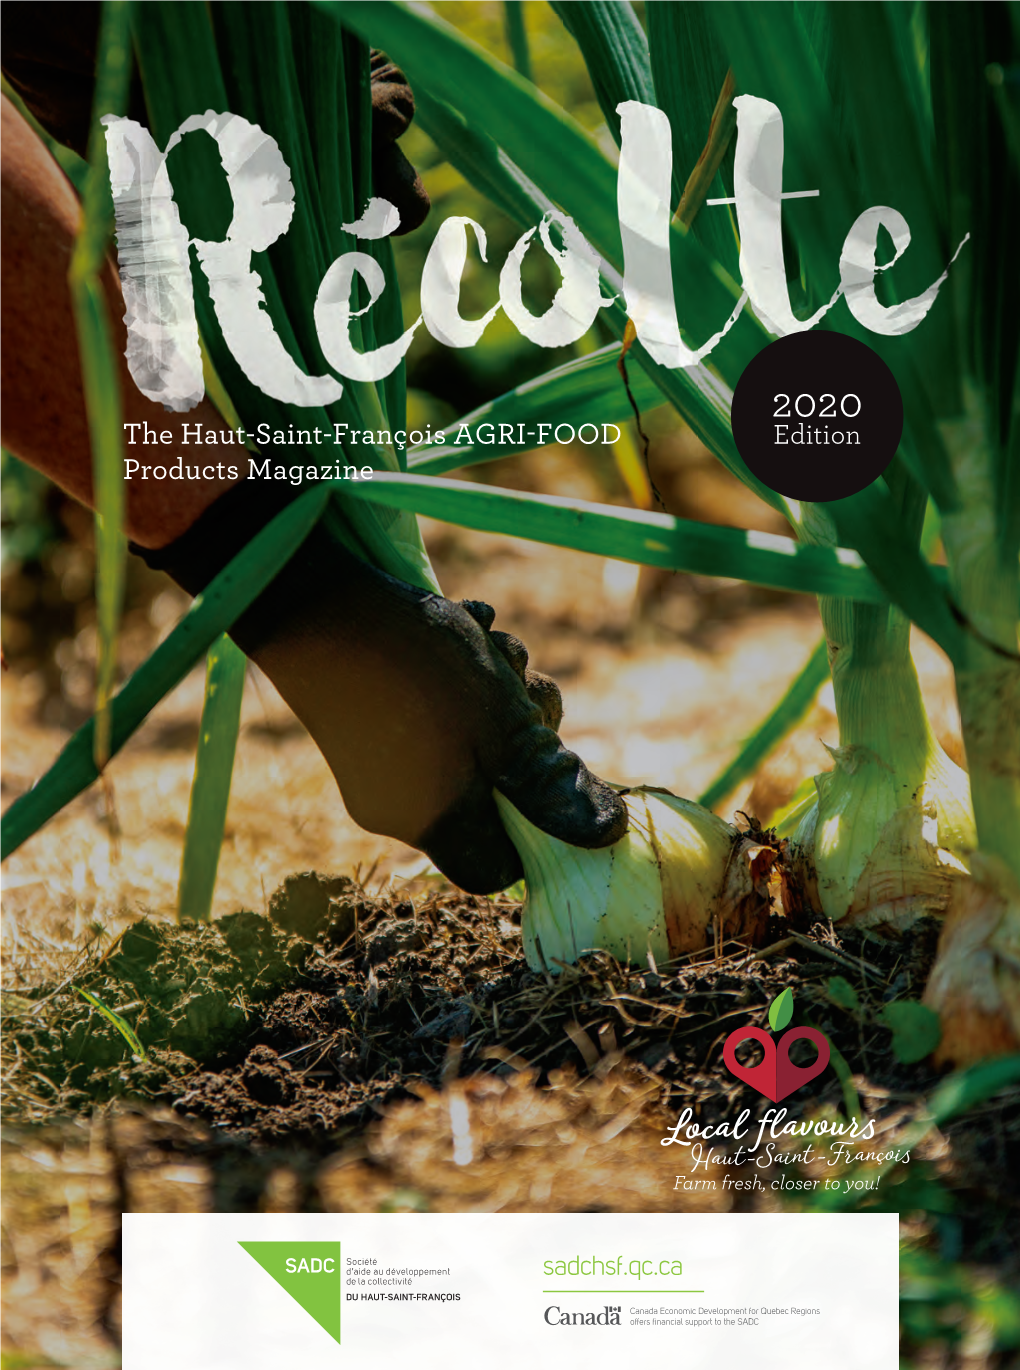 Récolte 2020 1 Offers ﬁ Nancial Support to the SADC Cover Photo By: Martin Mailhot